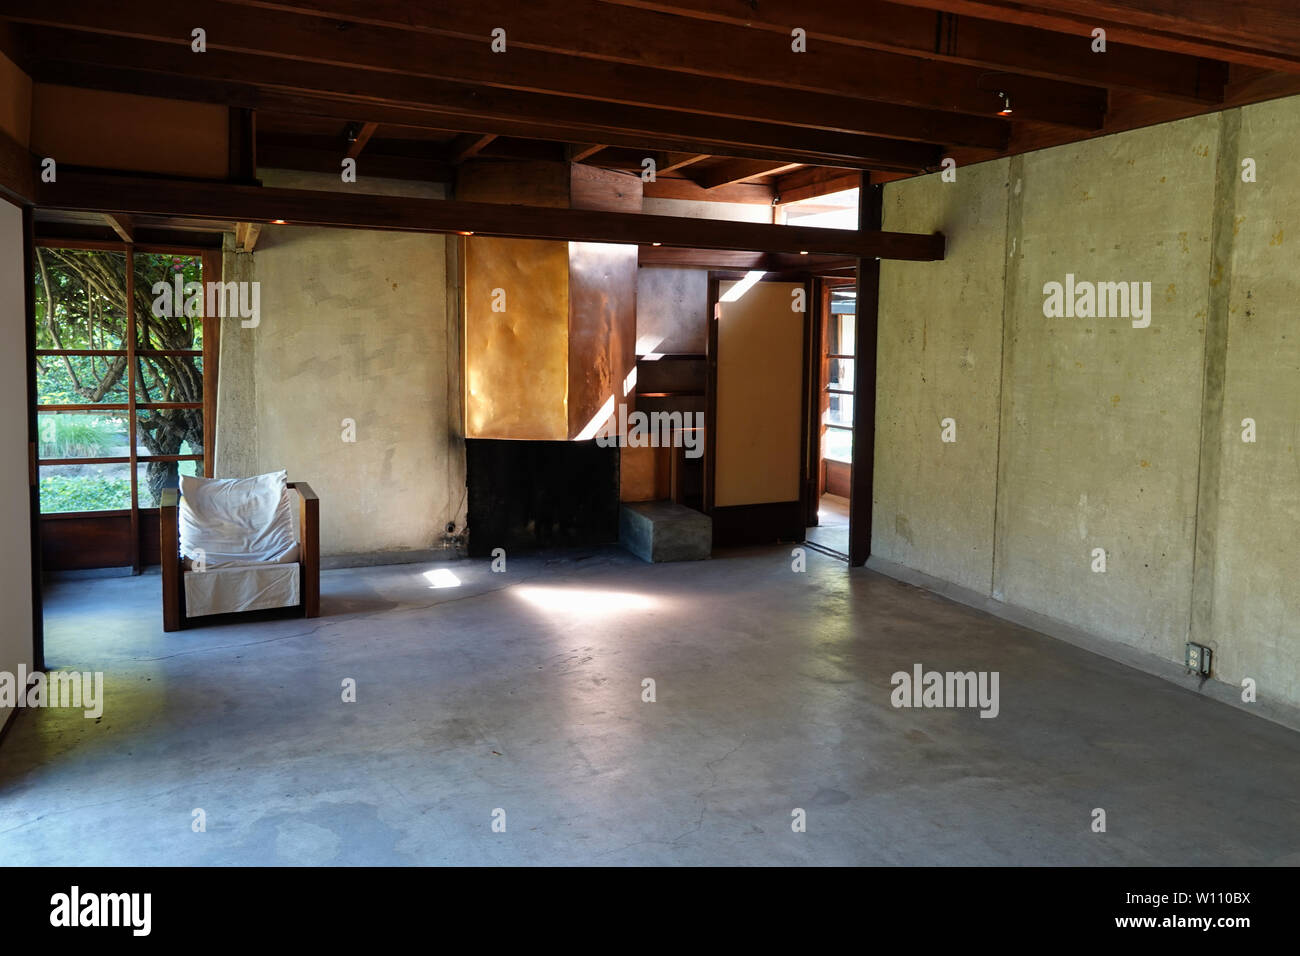 West Hollywood, CA / USA - June 28, 2019: An interior room is shown of the Rudolph M. Schindler House and MAK Center for Art and Architecture in L.A. Stock Photo